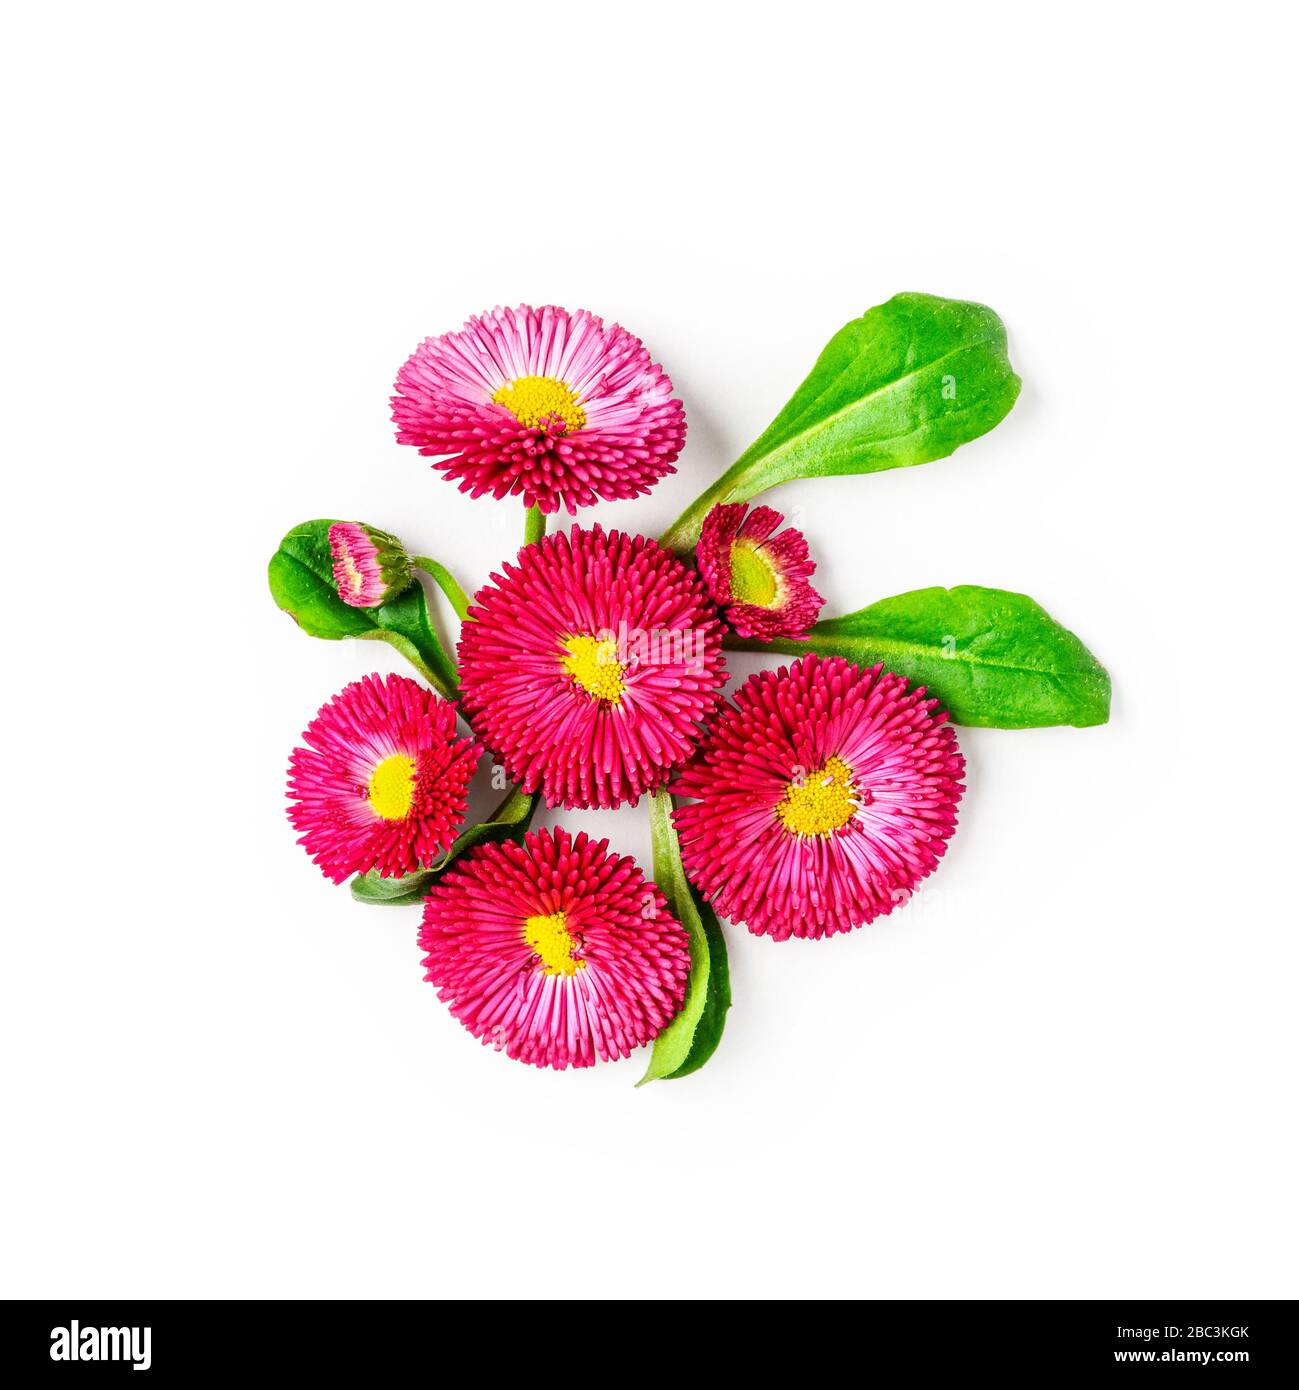 Daisy flower creative composition. Pink bellis perennis flowers isolated on white background with clipping path. Floral arrangement, design element. S Stock Photo